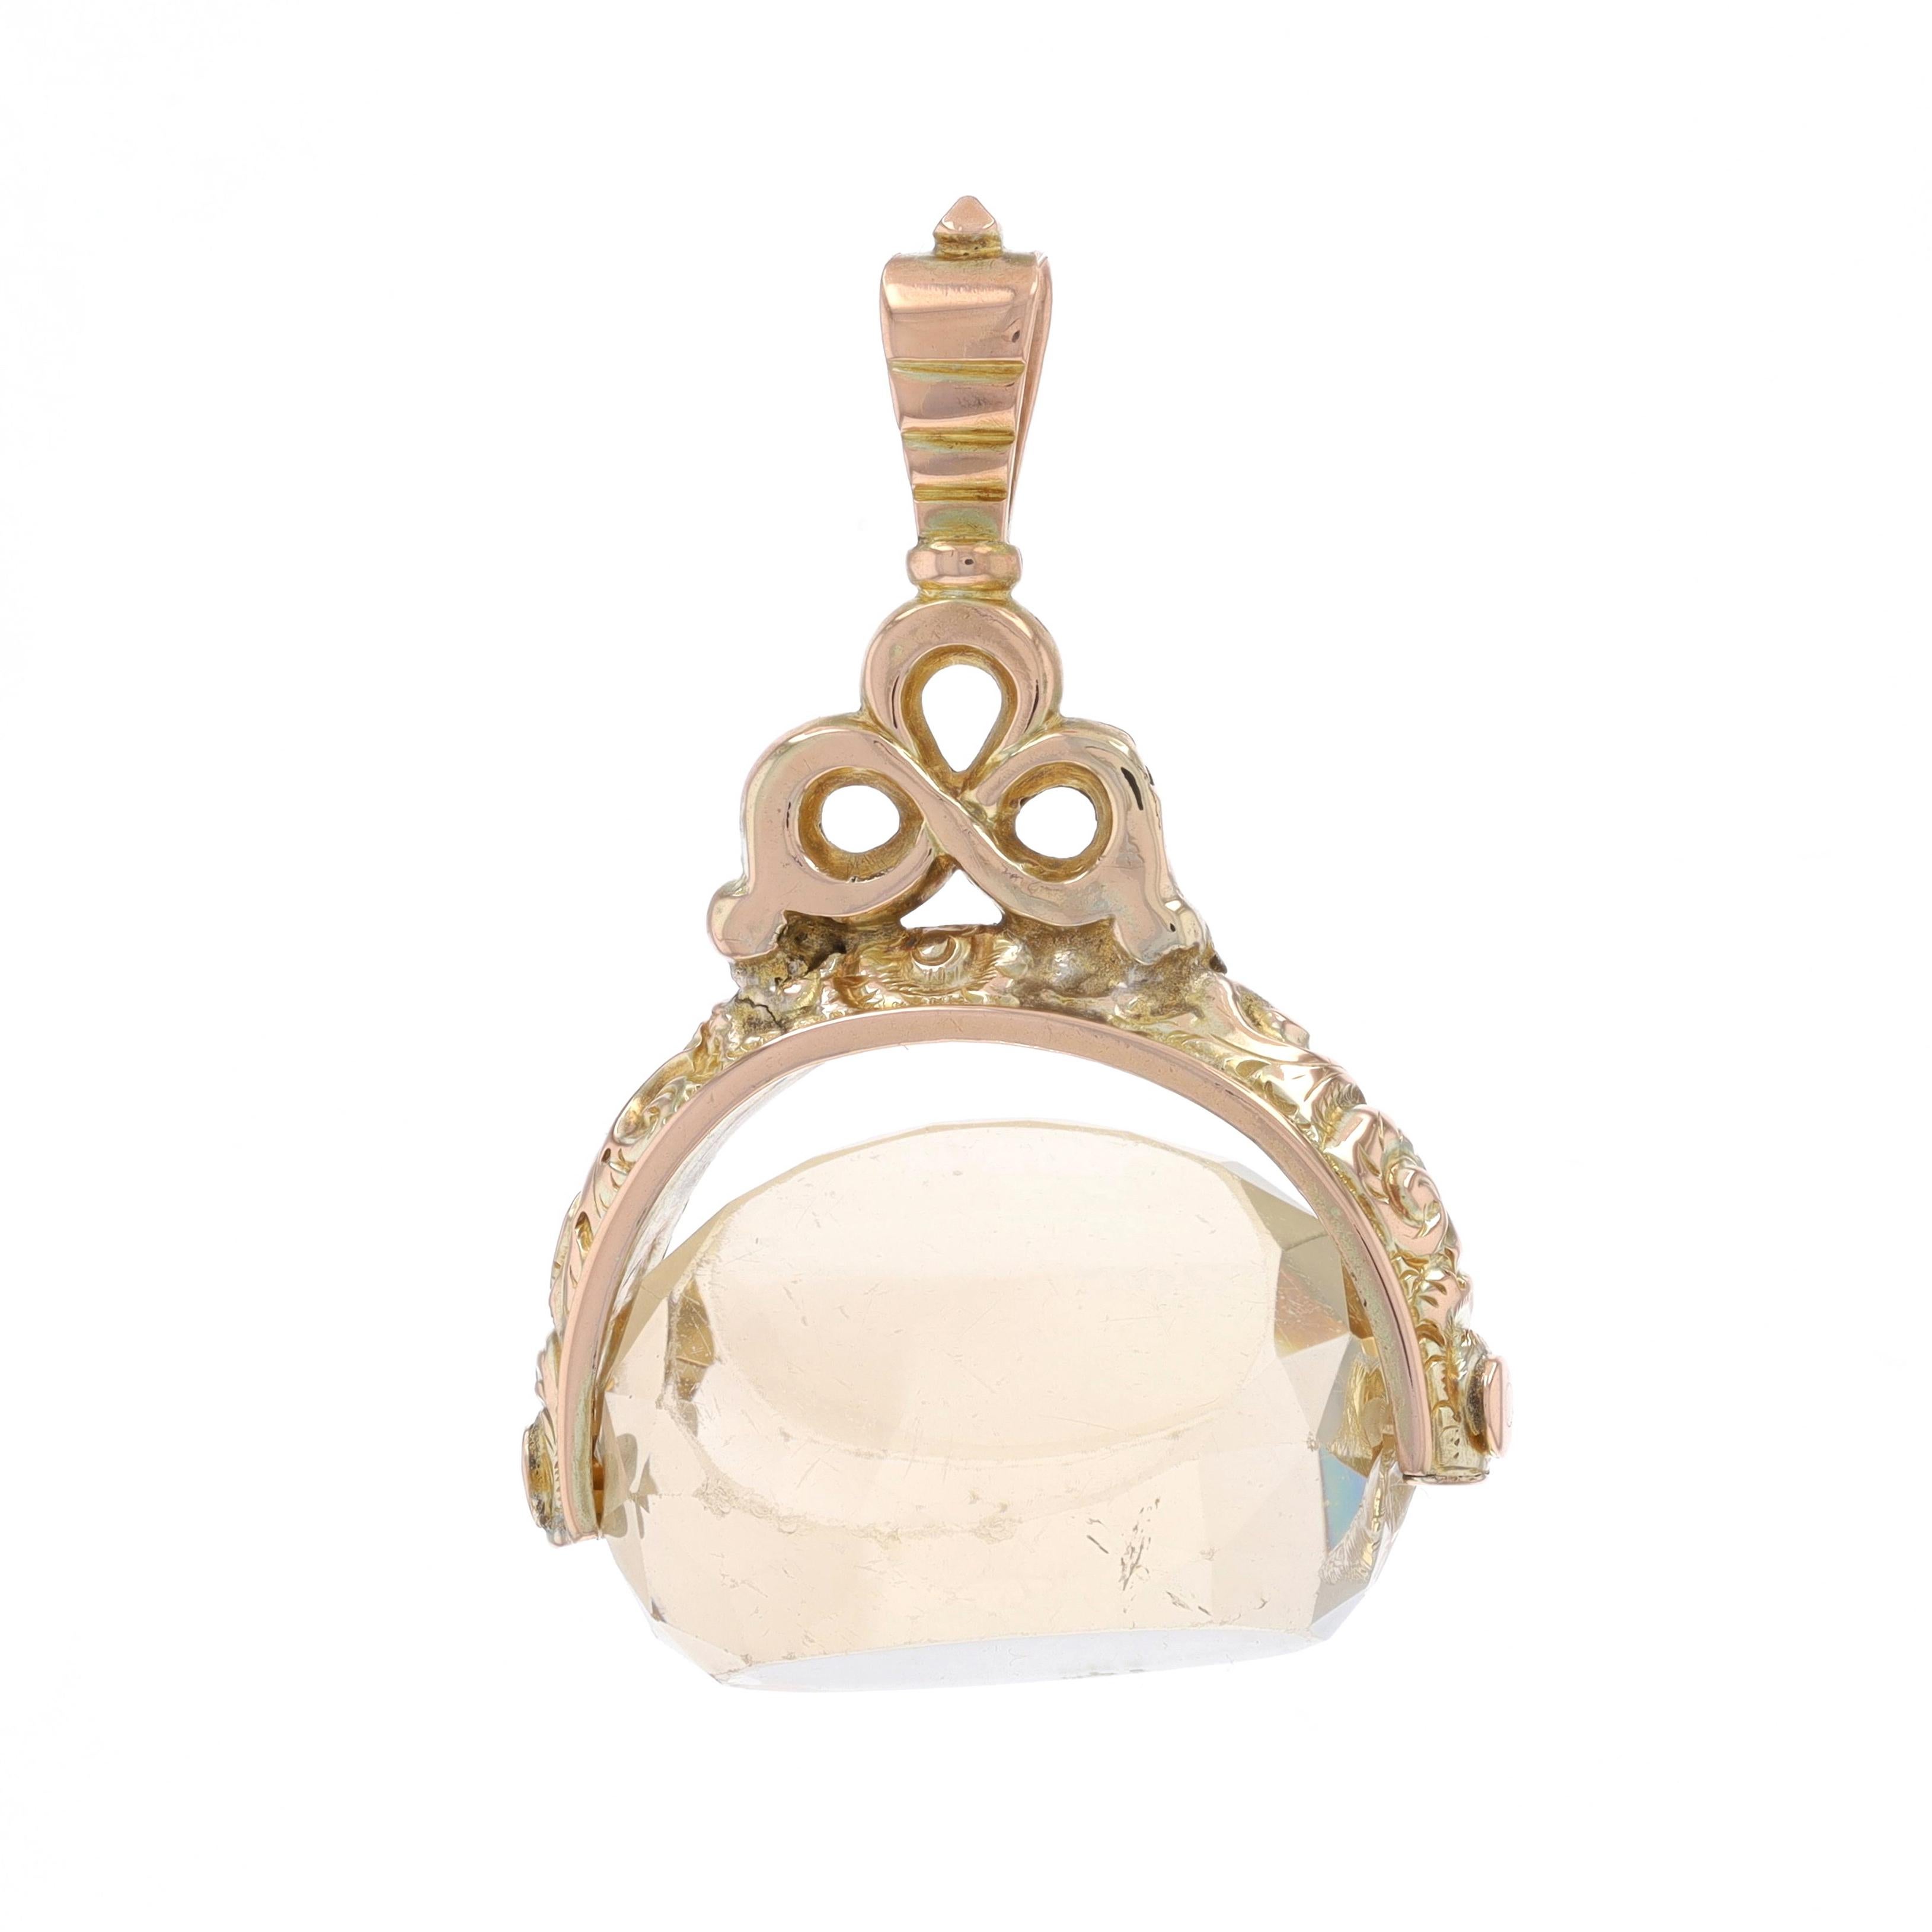 Era: Victorian
Date: 1860s - 1880s

Metal Content: 9k Yellow Gold

Stone Information

Natural Quartz
Cut: Fancy
Color: Light Yellow

Style: Fob
Theme: Scrollwork
Features: Etched Scrollwork Detailing

Measurements

Tall (from stationary bail): 1